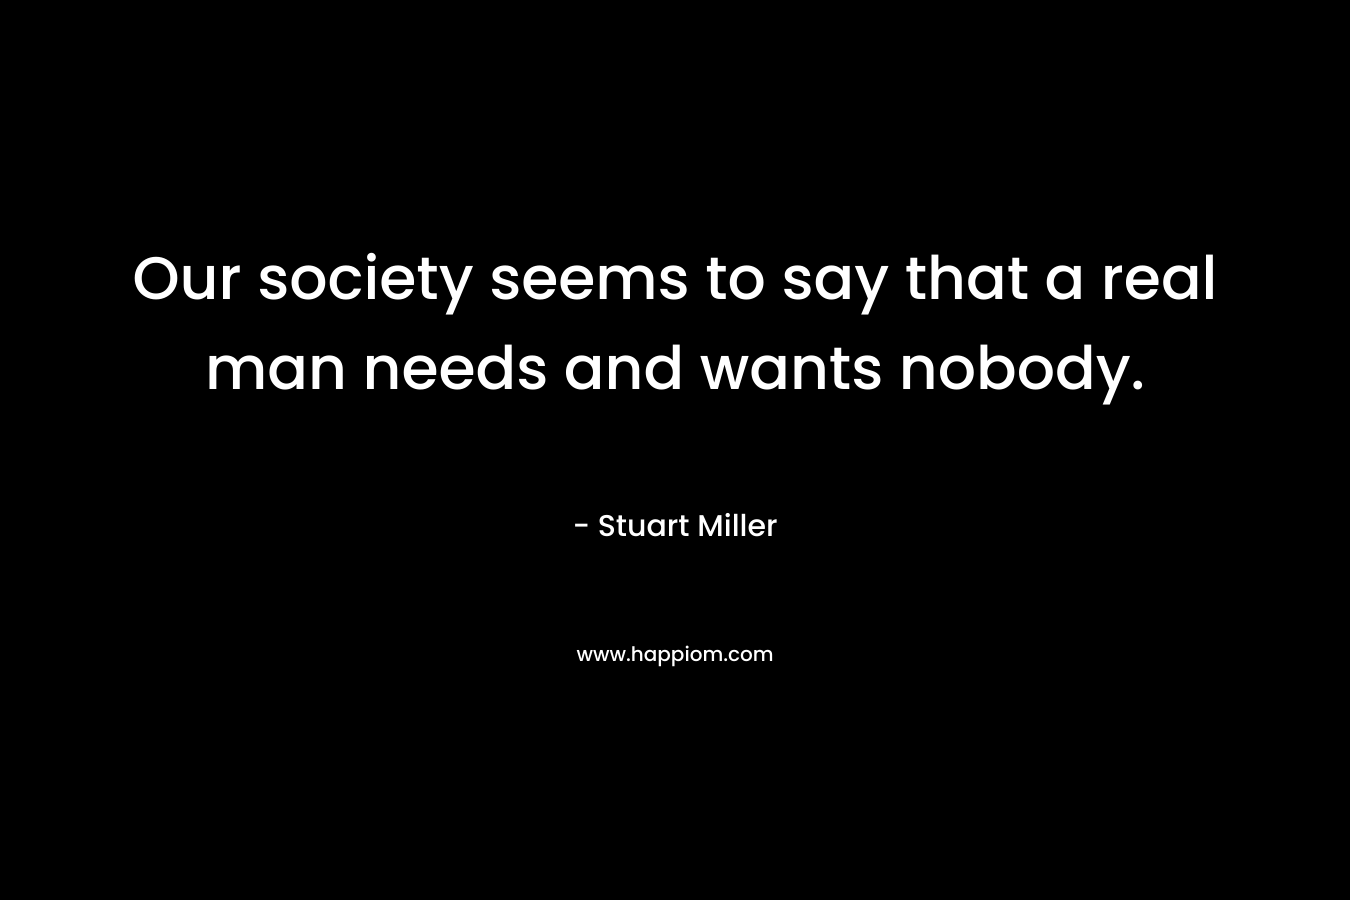 Our society seems to say that a real man needs and wants nobody.